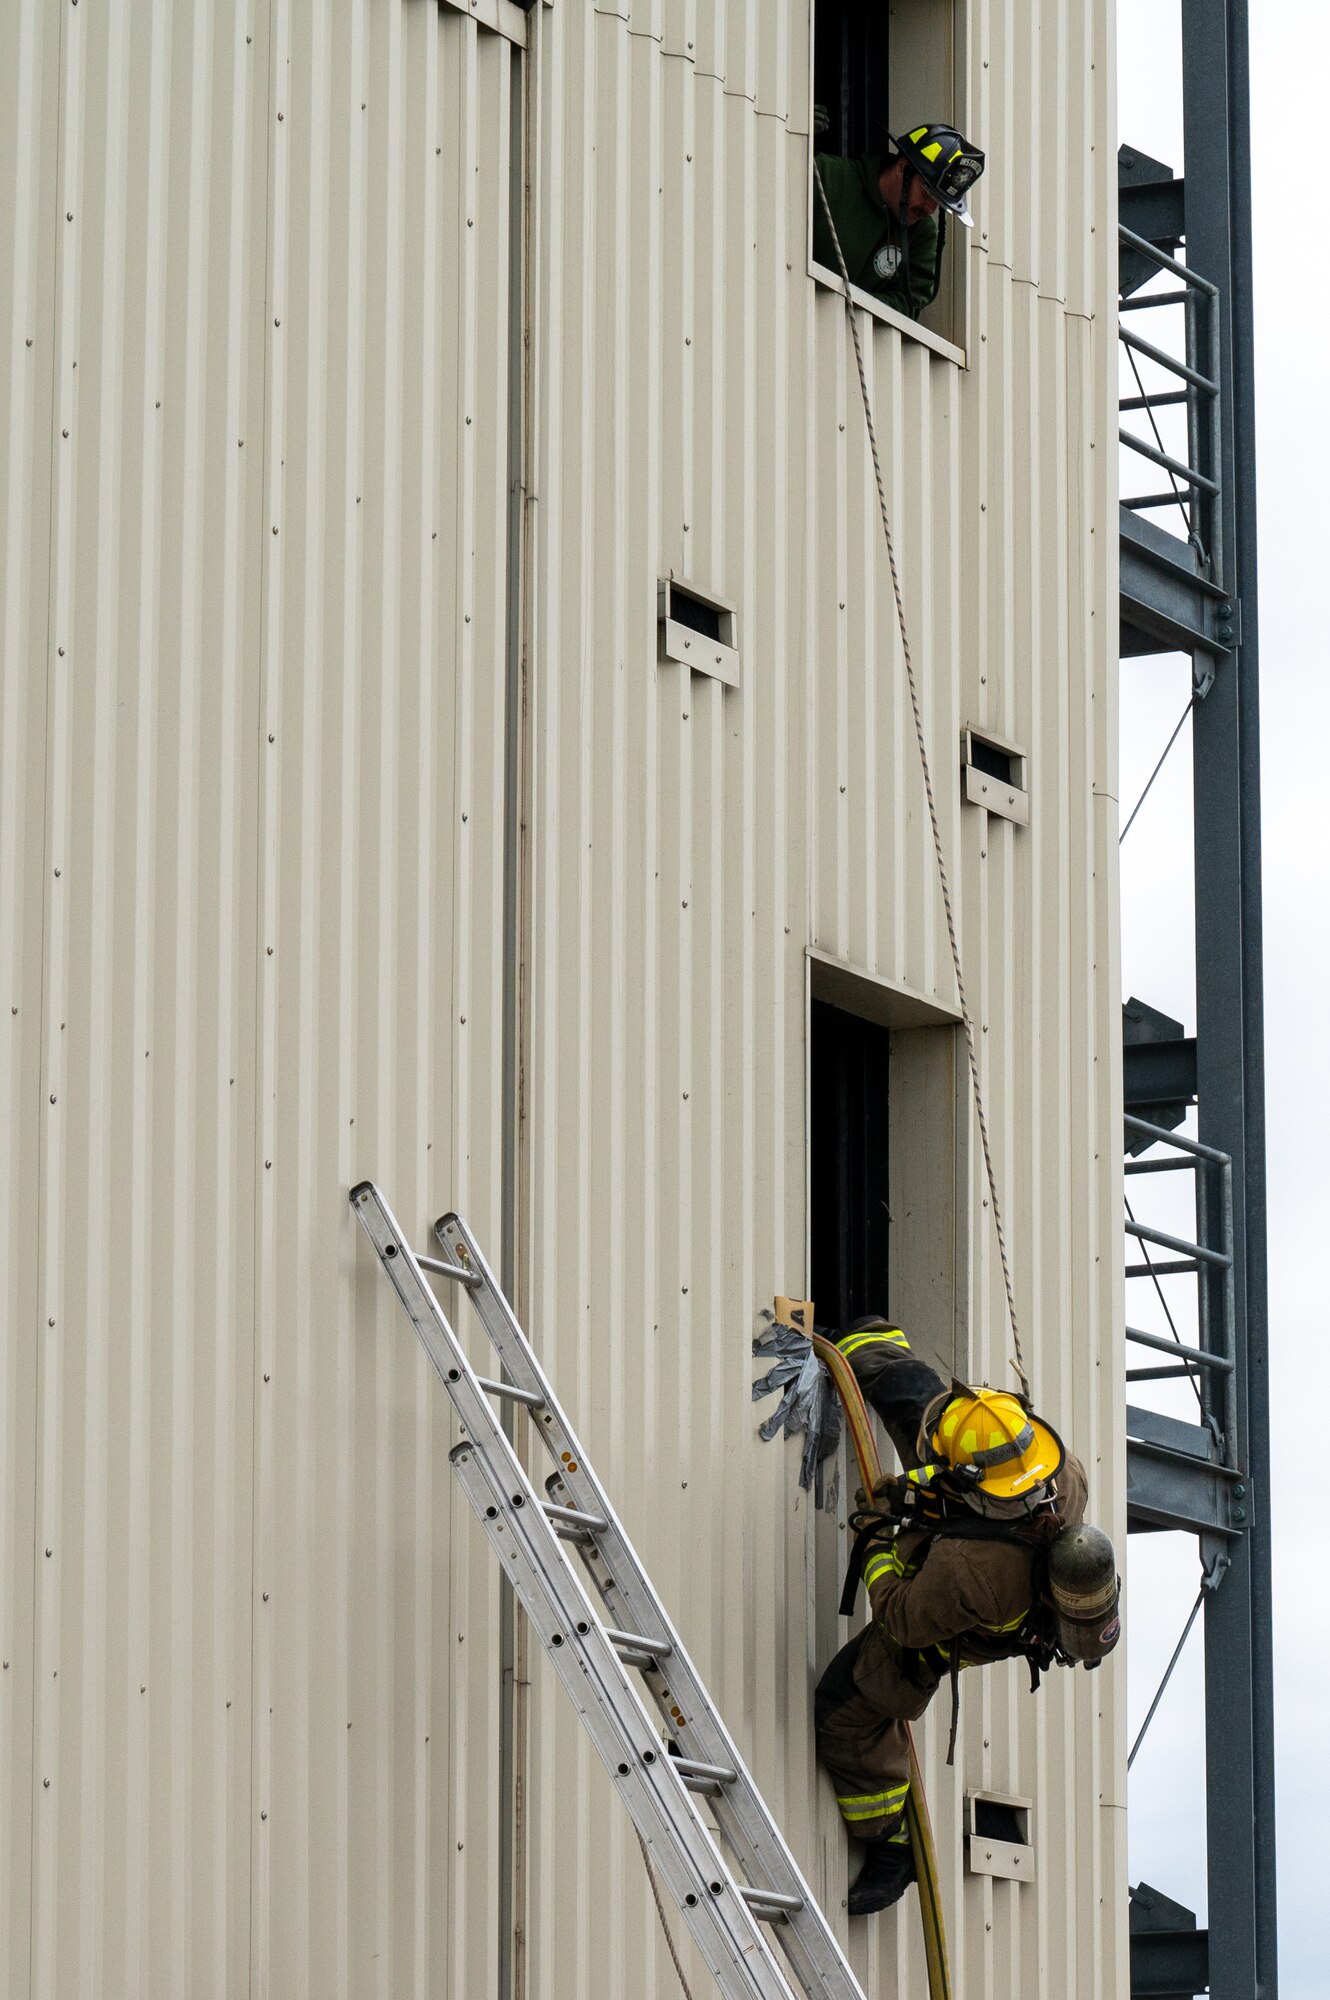 A firefighter bailing out of a window while another leans out of an above window to observe.